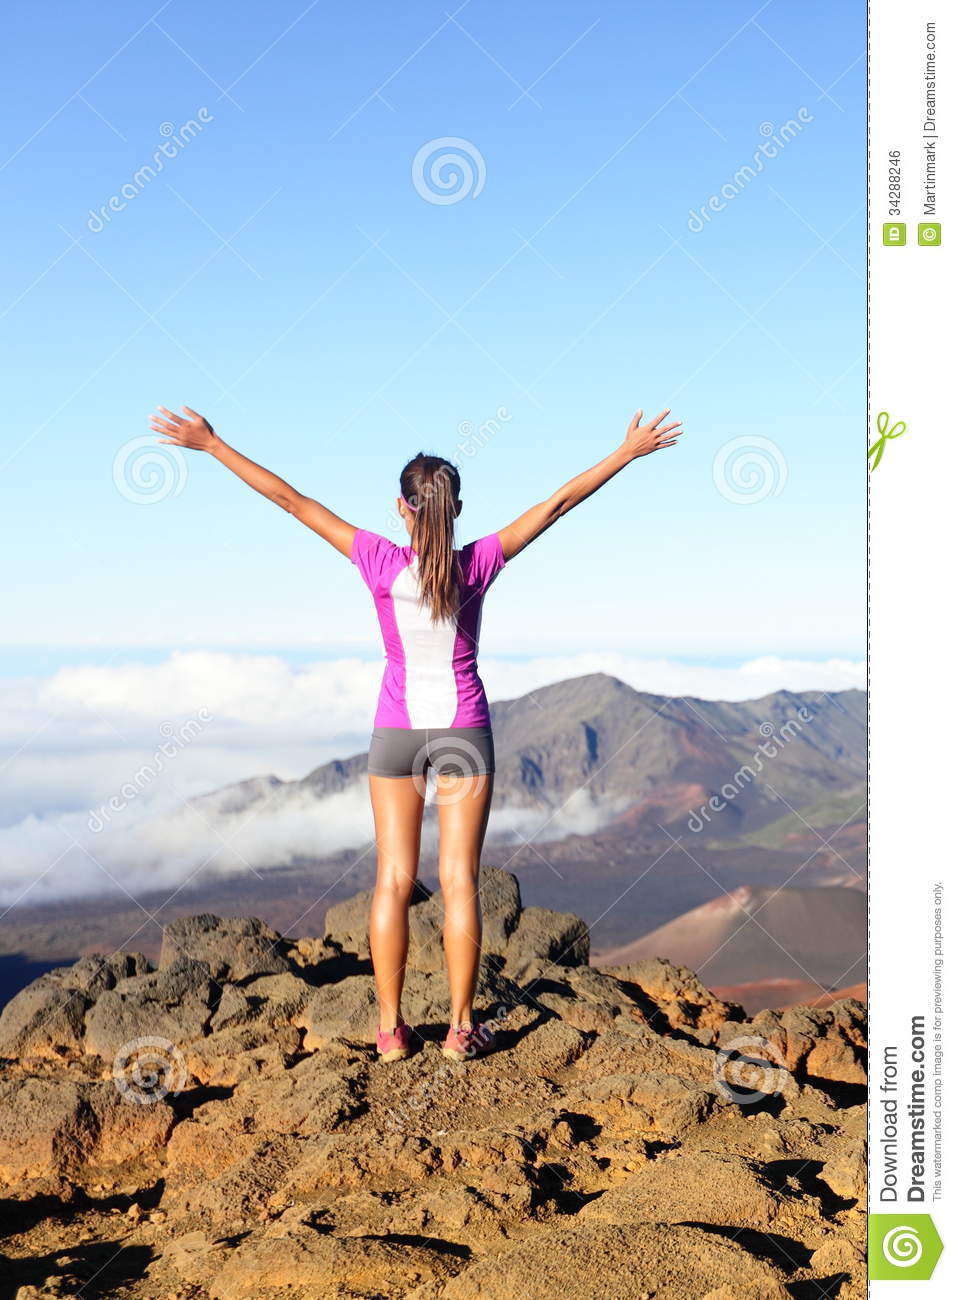 Success And Achievement   Hiking Woman On Top Royalty Free Stock Image    